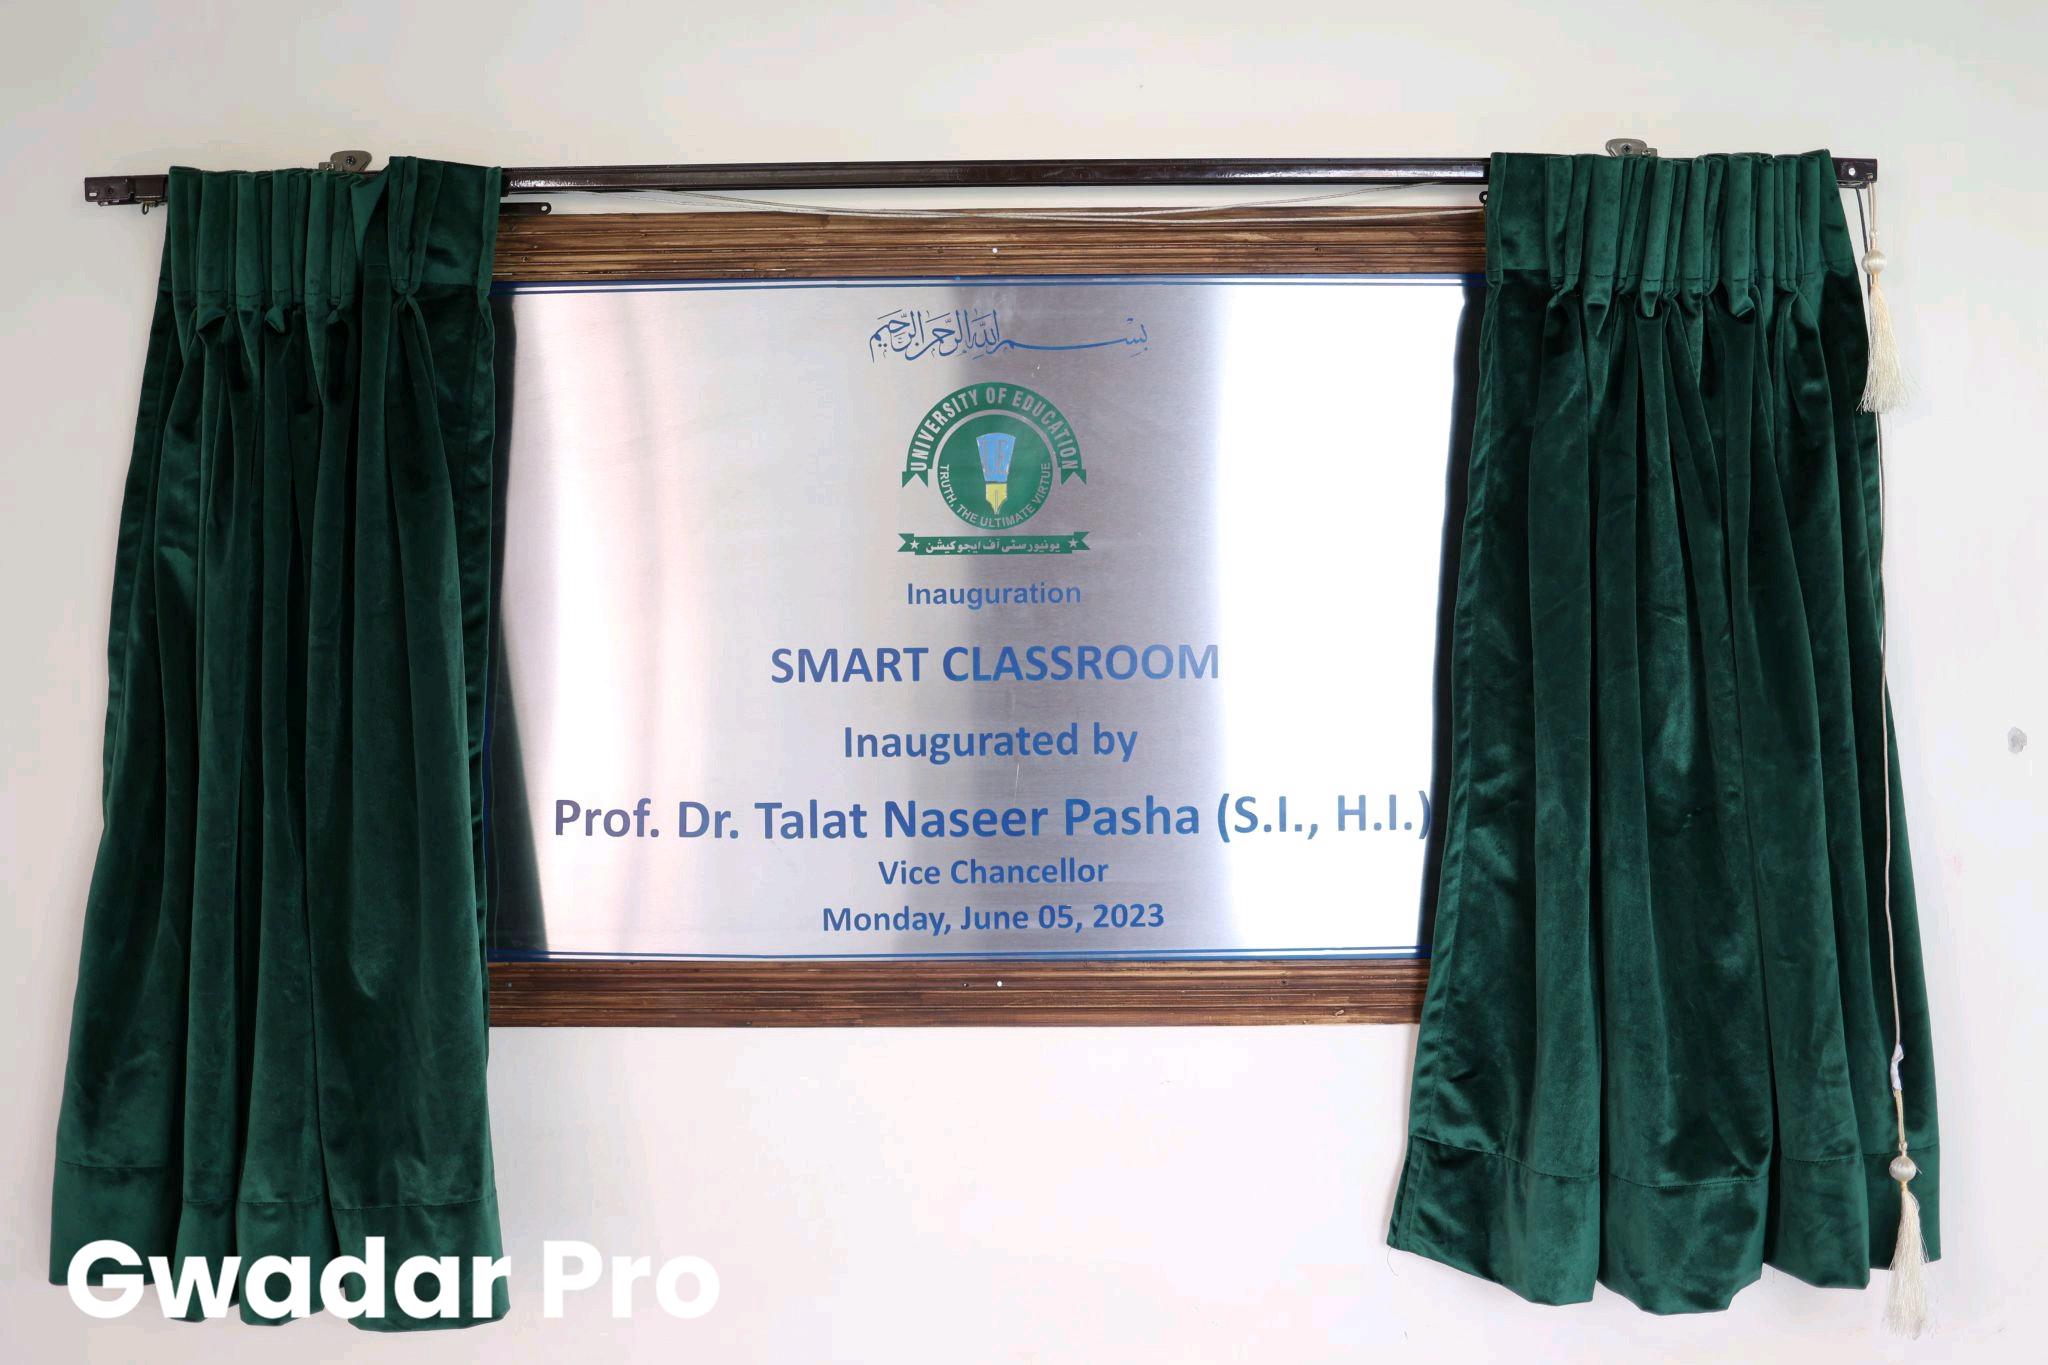 Smart Classroom inaugurated at University of Education, Lahore